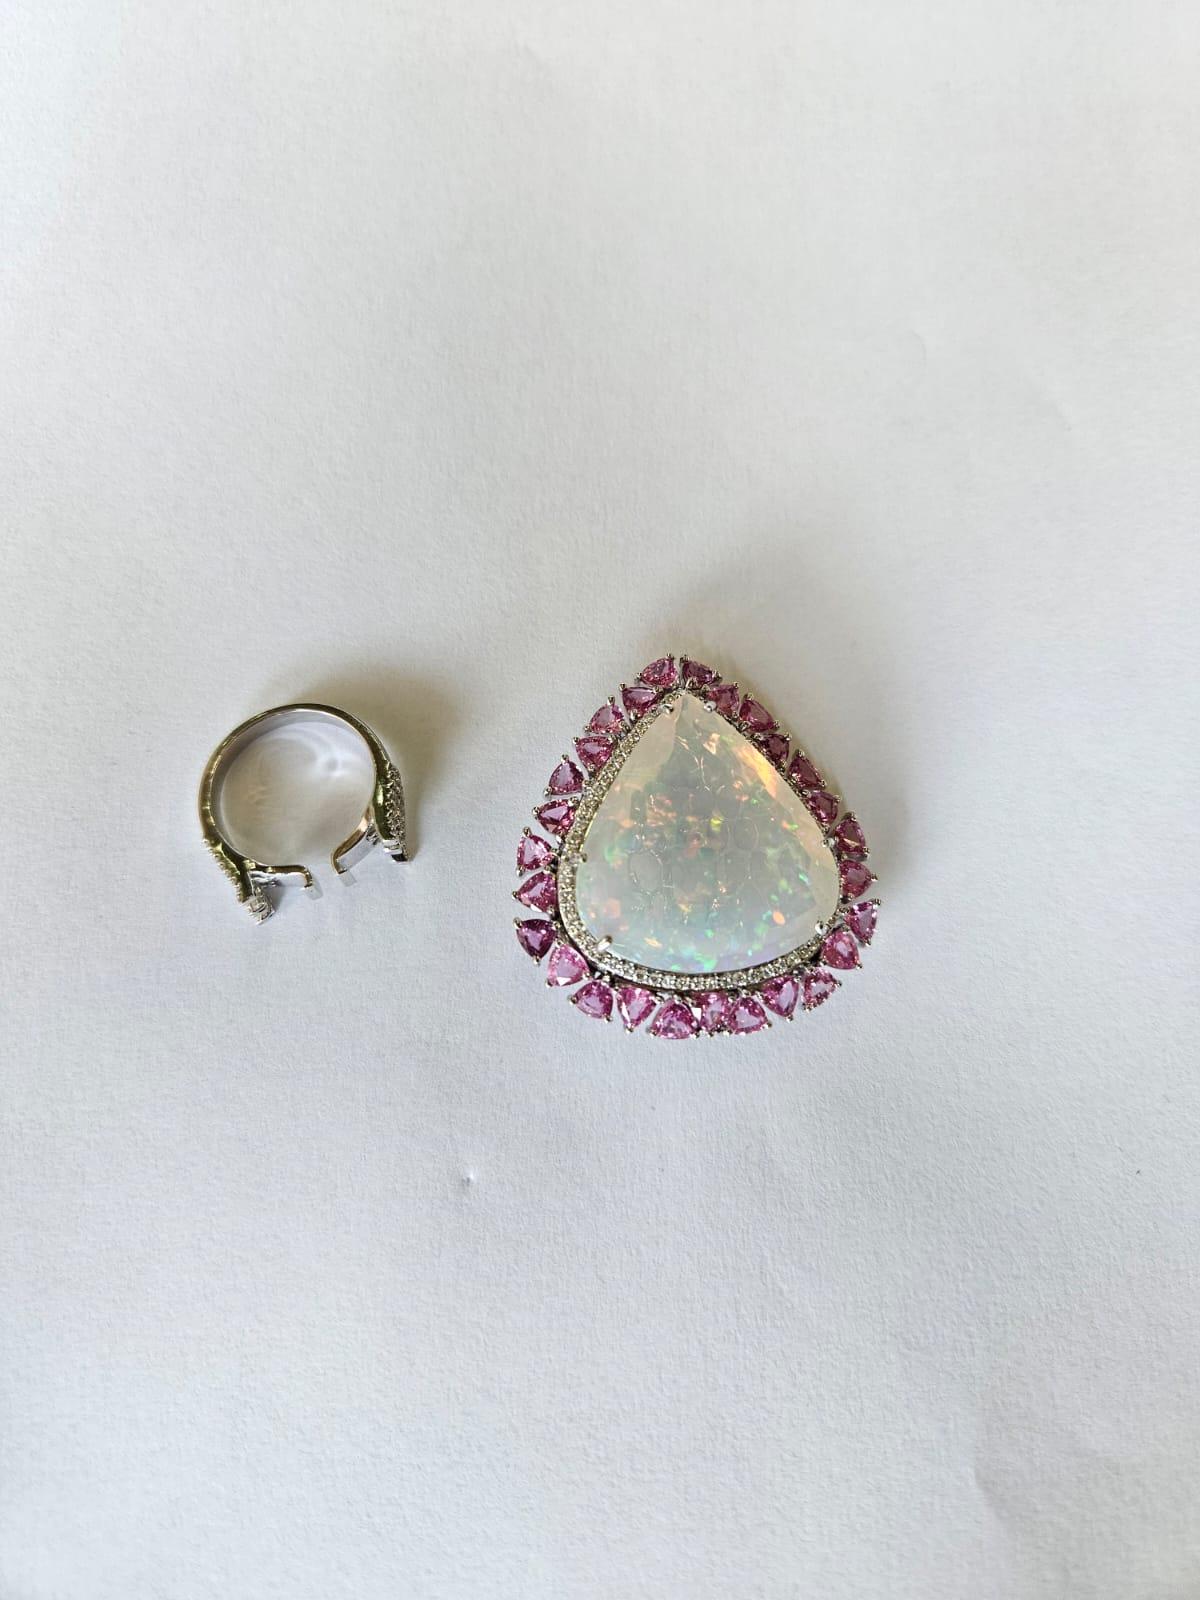 A very gorgeous and modern style, convertible Opal & Pink Sapphire Cocktail Ring / Pendant Necklace set in 18K White Gold & Diamonds. The weight of the Opal is 29.59 carats. The Opal is of Ethiopian origin. The weight of the Pink Sapphires is 6.98